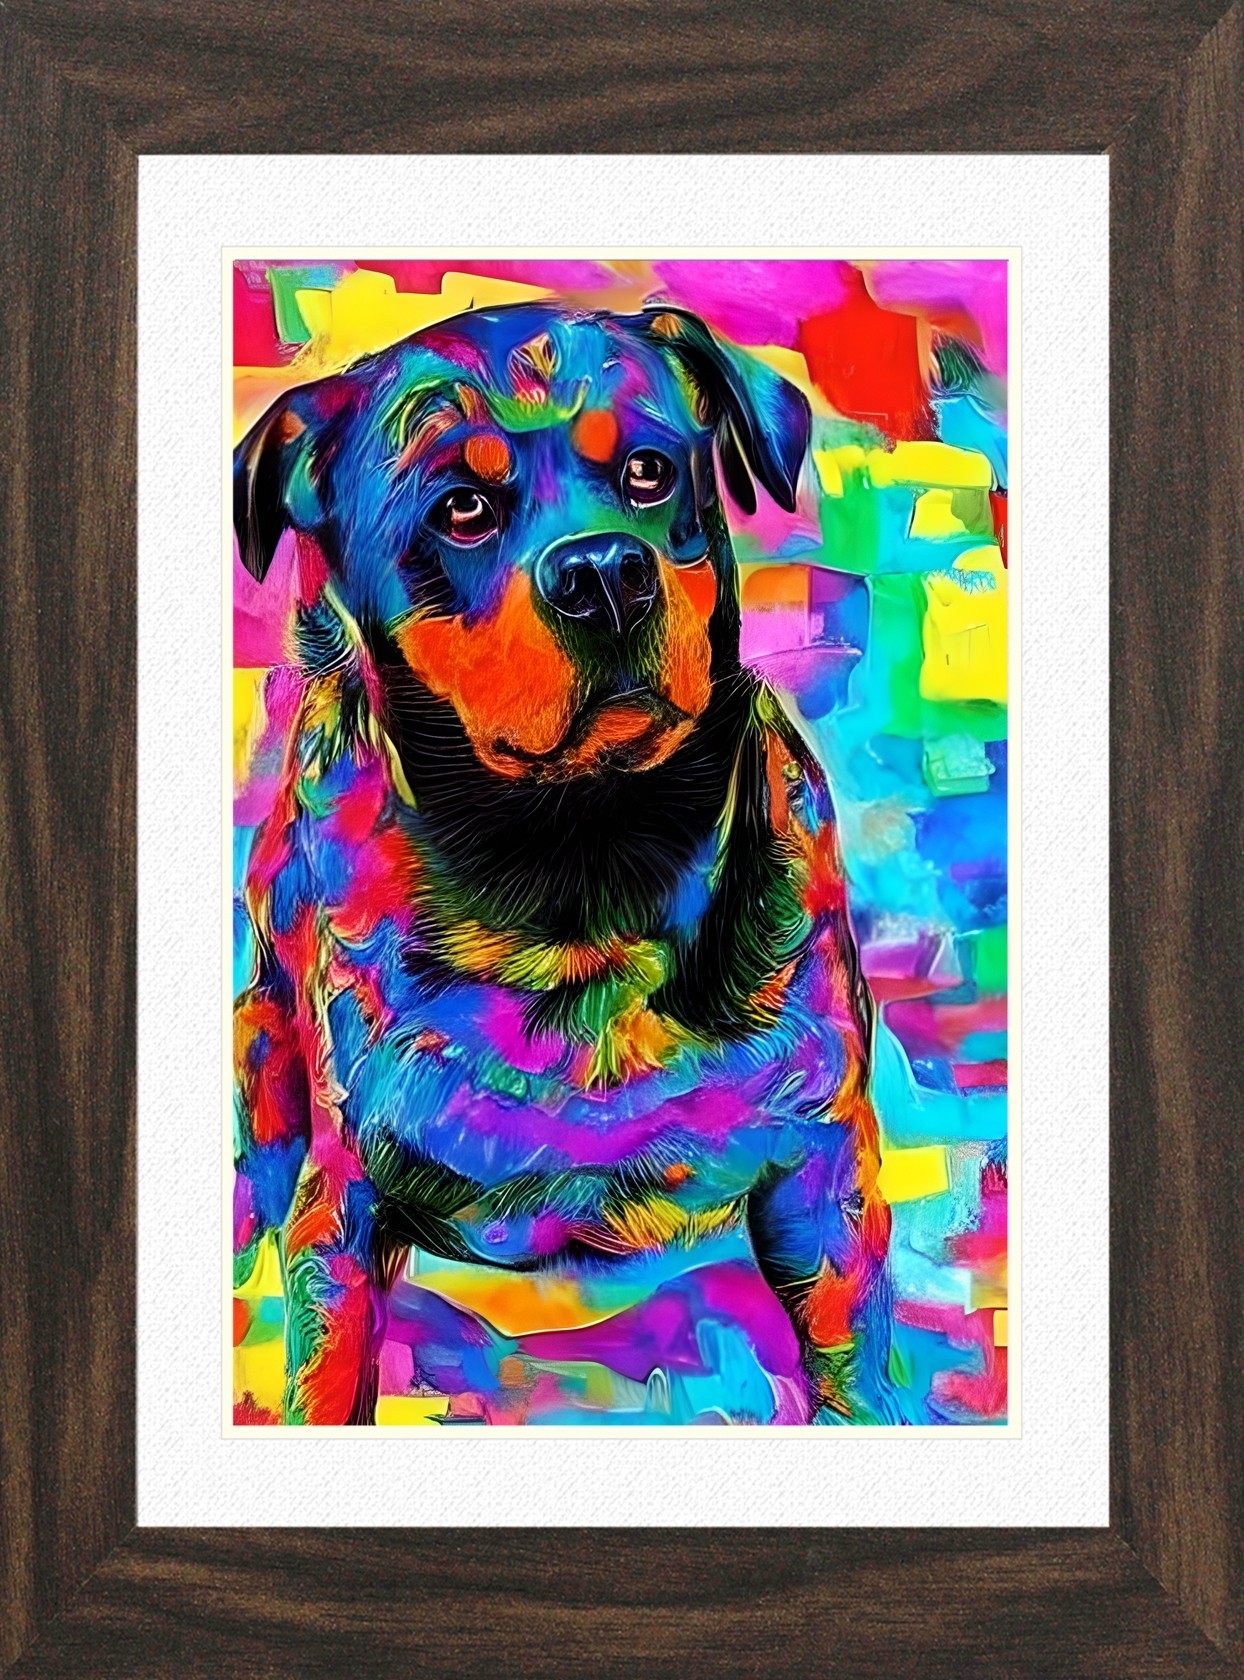 Rottweiler Dog Picture Framed Colourful Abstract Art (A3 Walnut Frame)